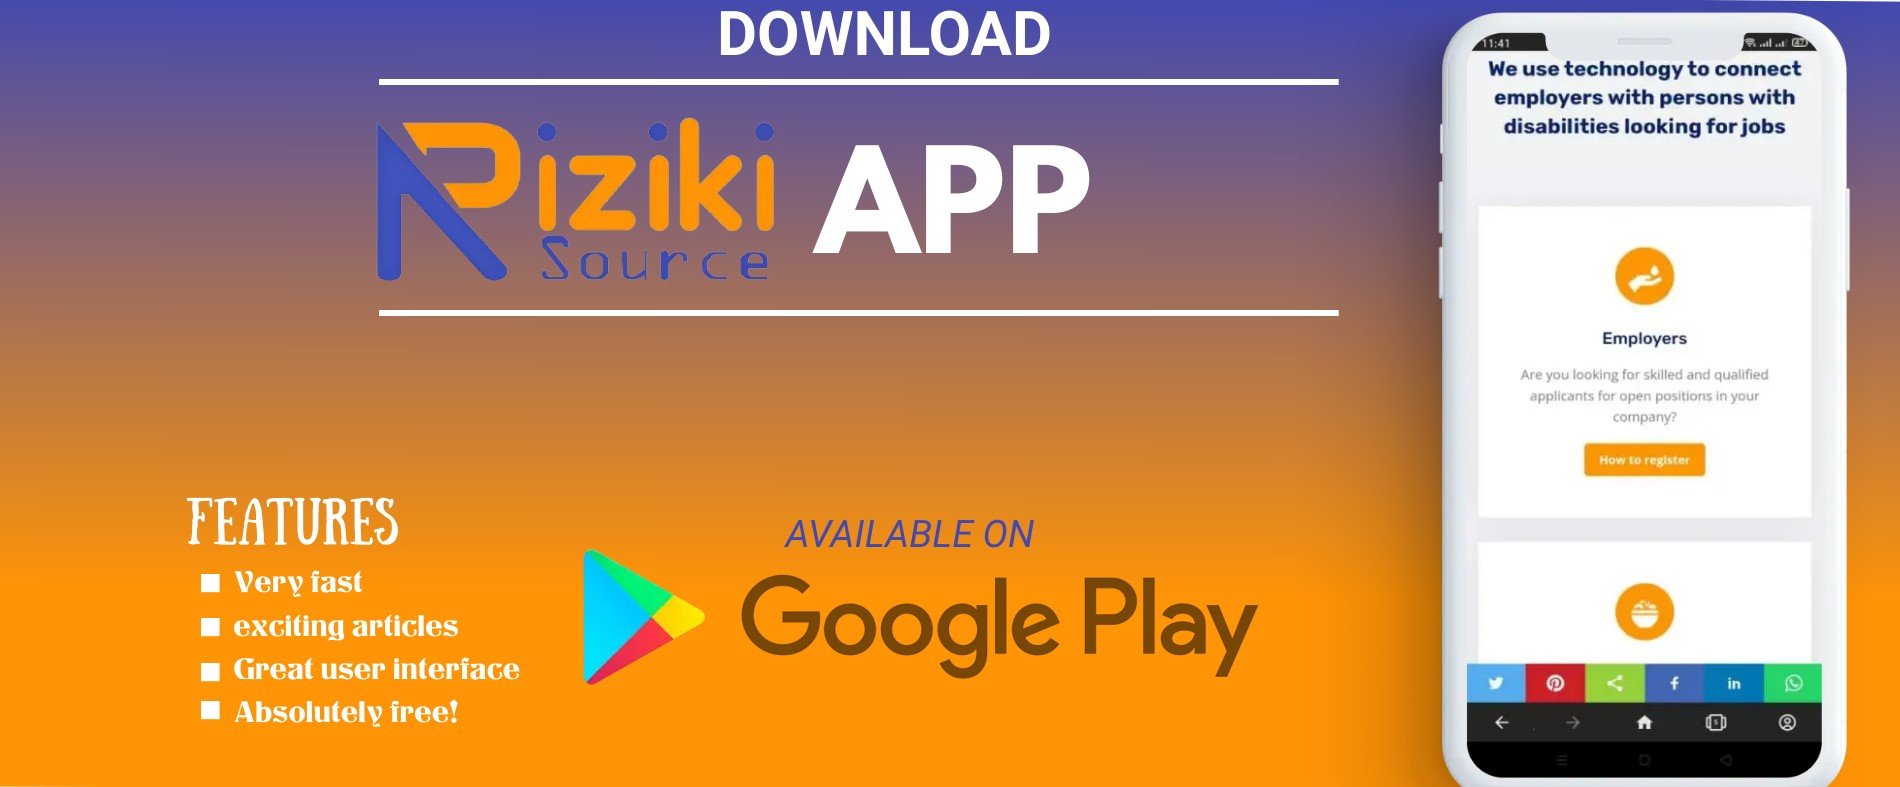 Graphic showing how to download Riziki app on google play. Cover Image